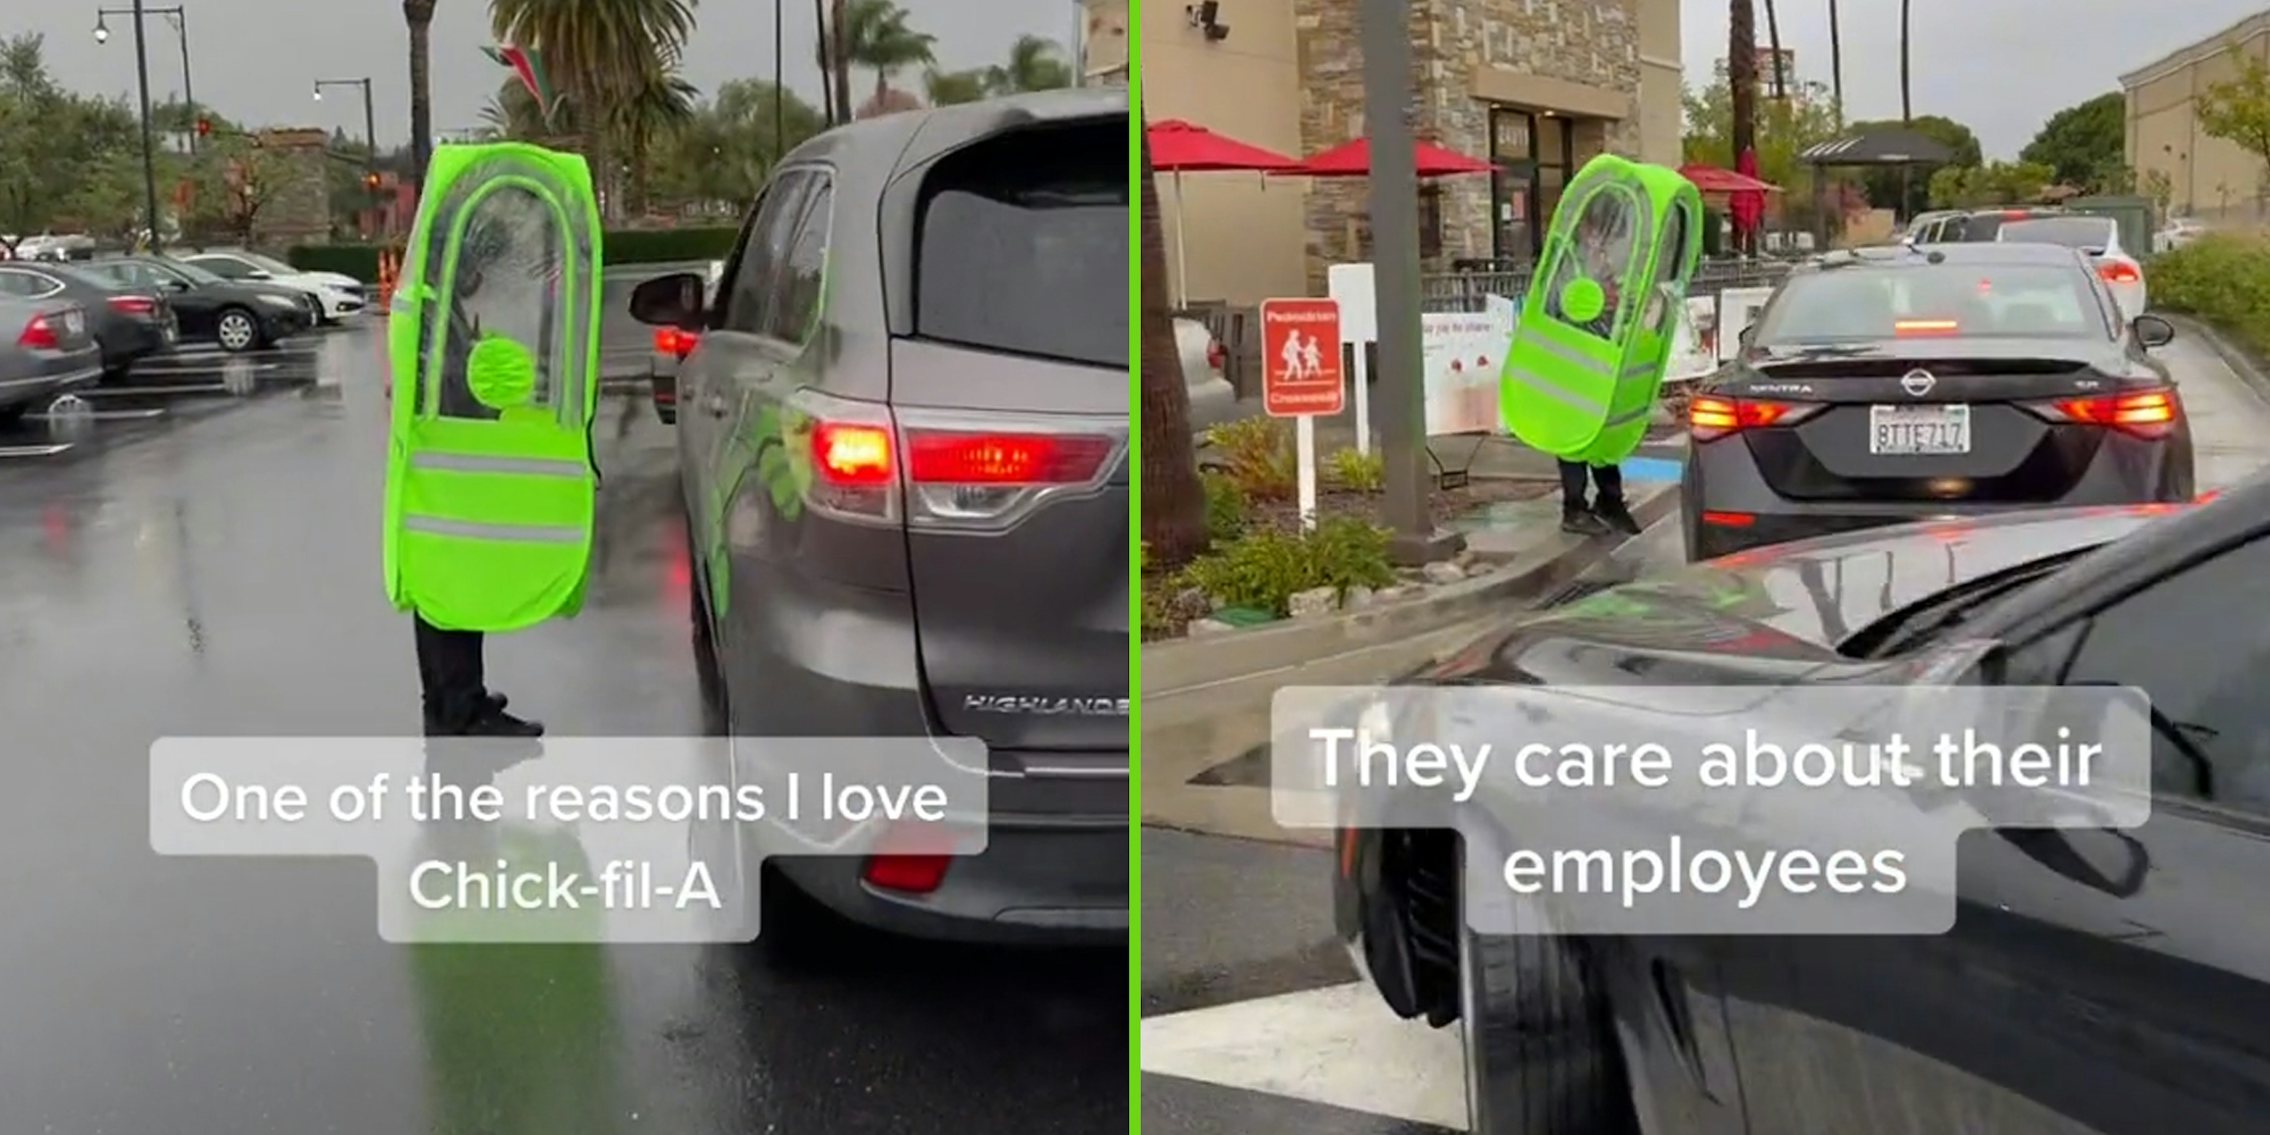 Chick-fil-A employees wearing portable rainproof units in drive-thru